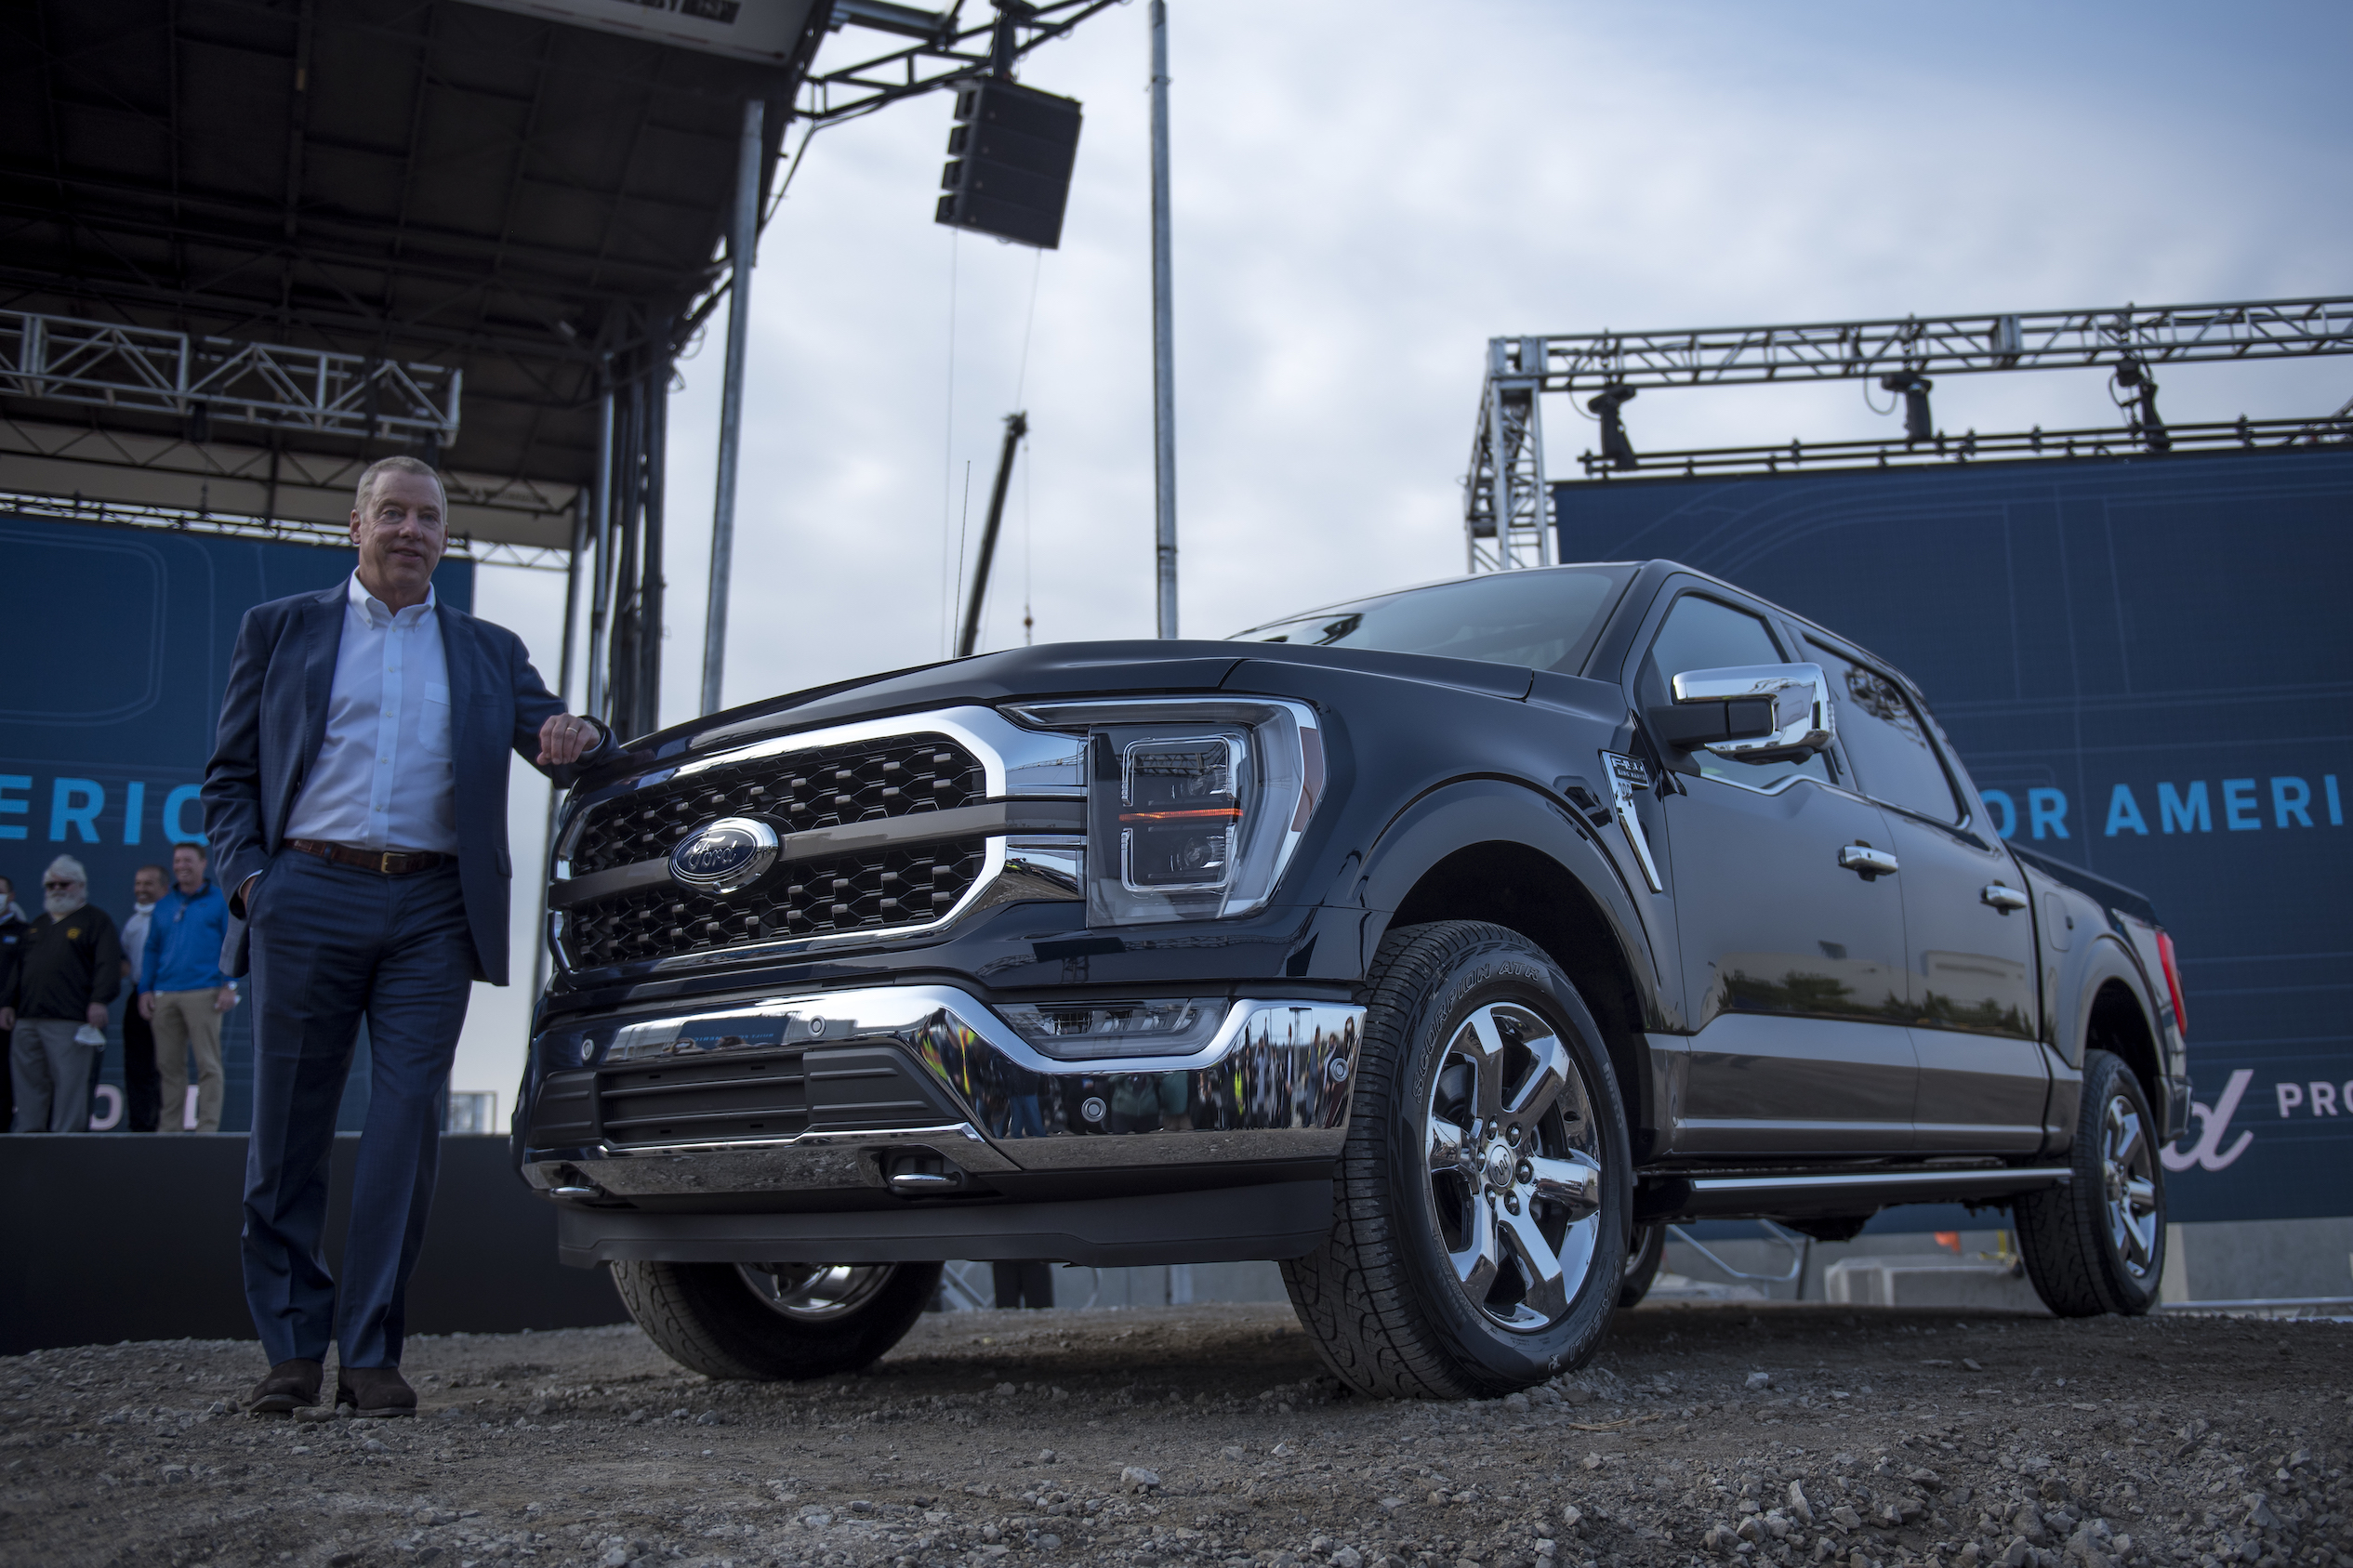 Executive Chairman of Ford Bill Ford poses for a photo with the 2021 Ford F-150 King Ranch Truck at the Ford Built for America event at Ford’s Dearborn Truck Plant